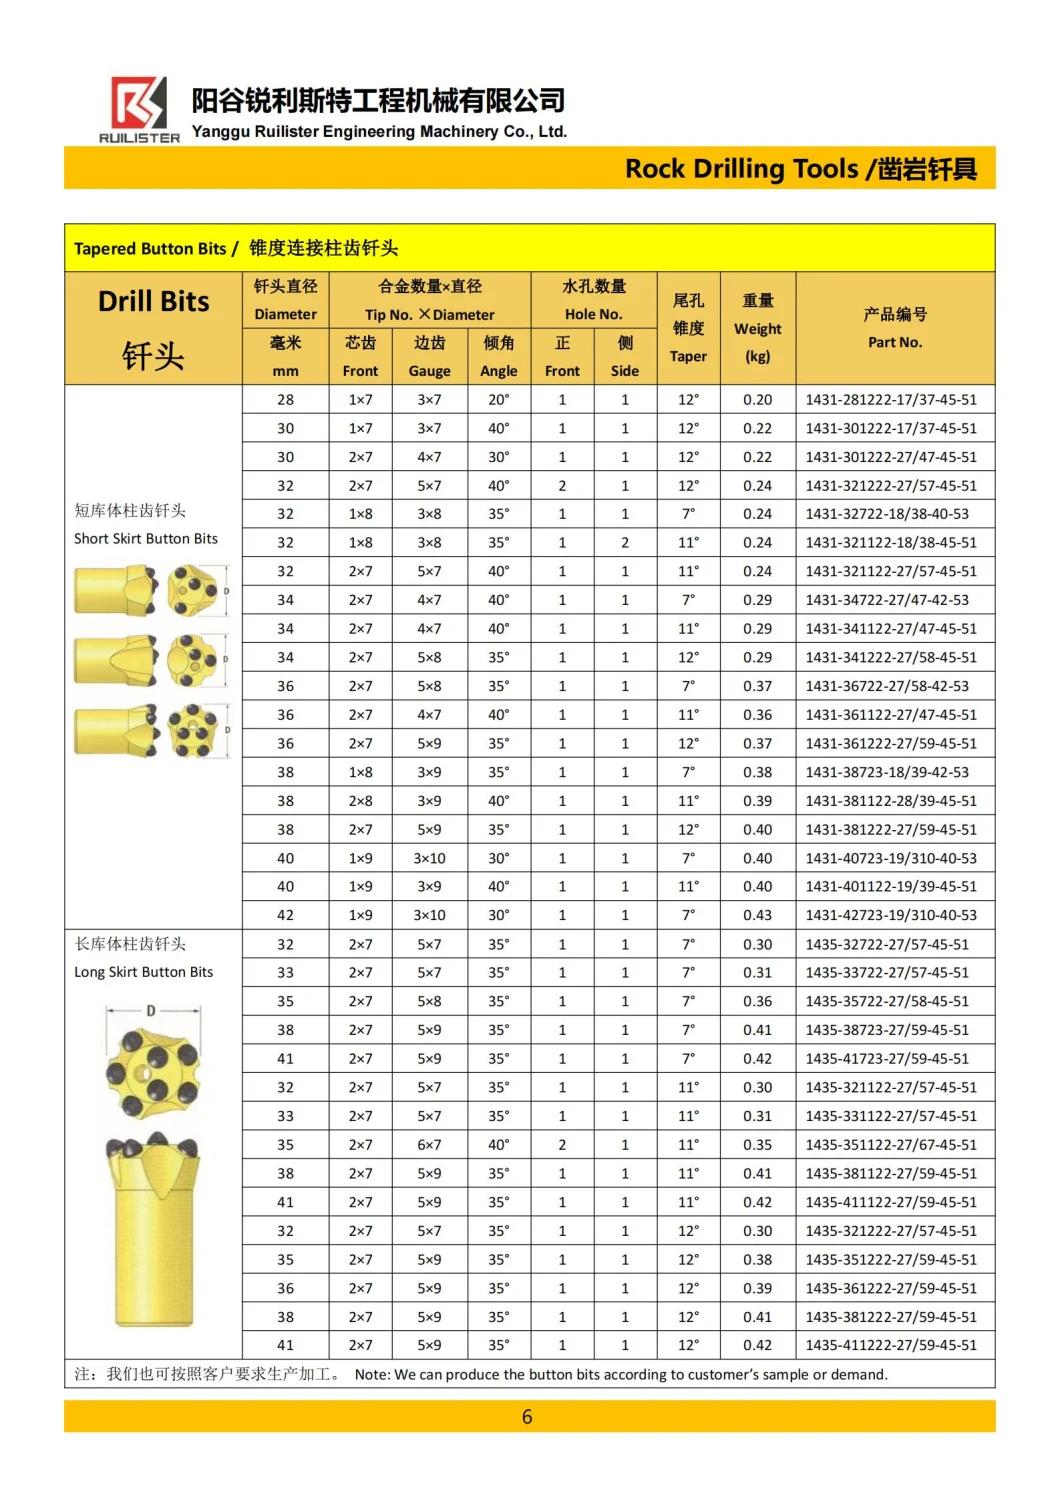 Rock Drilling Tools Qingdao Durable Carbide 38mm Tapered Drill Bit Button Bits